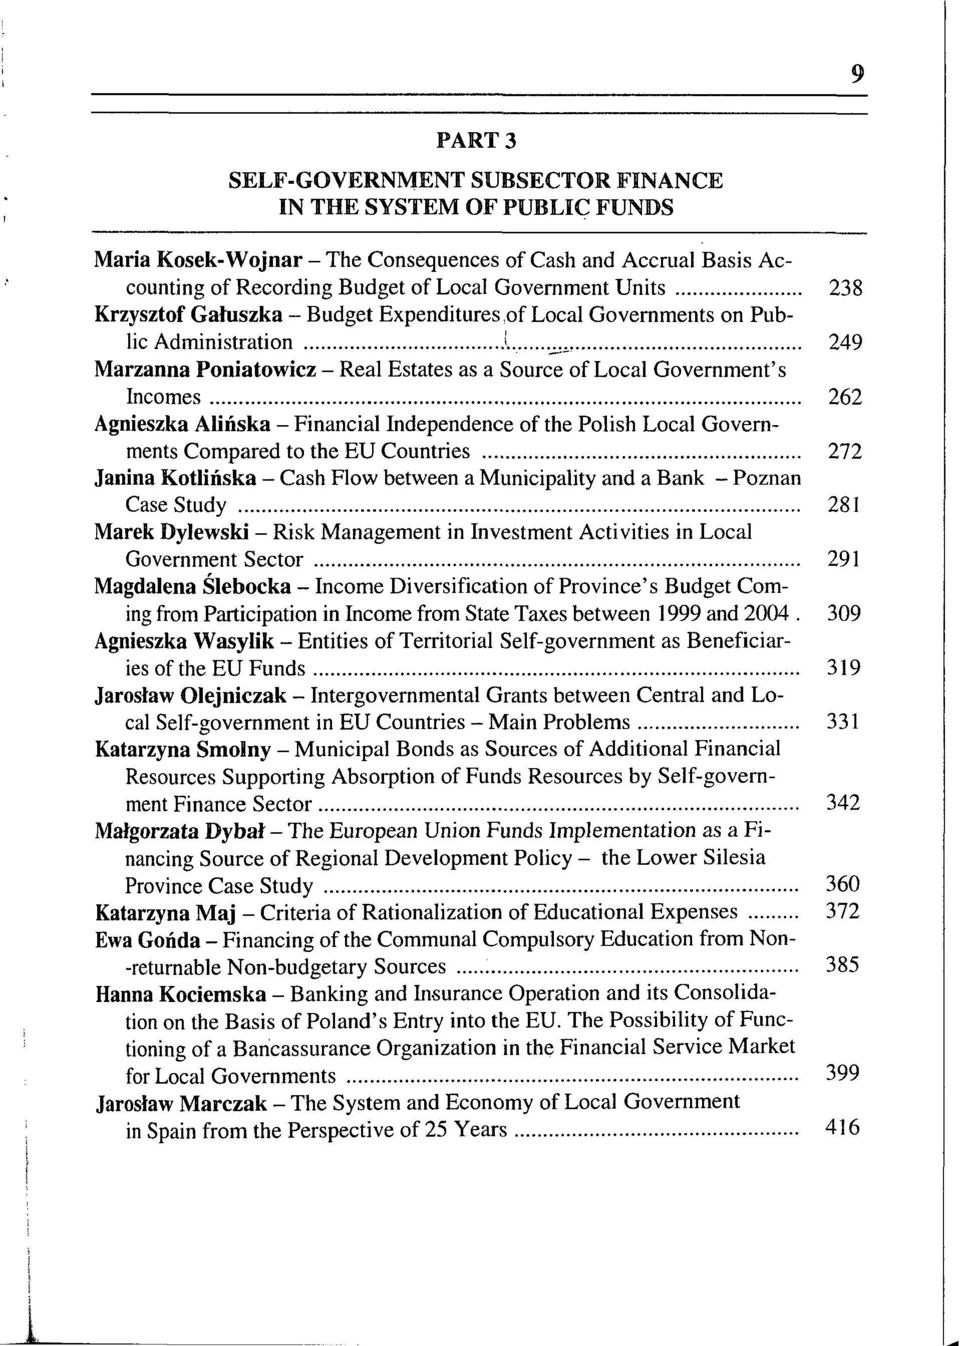 , 249 Marzanna Poniatowicz - Real Estates as a Source of Local Government's Incomes 262 Agnieszka Alińska - Financial Independence of the Polish Local Governments Compared to the EU Countries 272